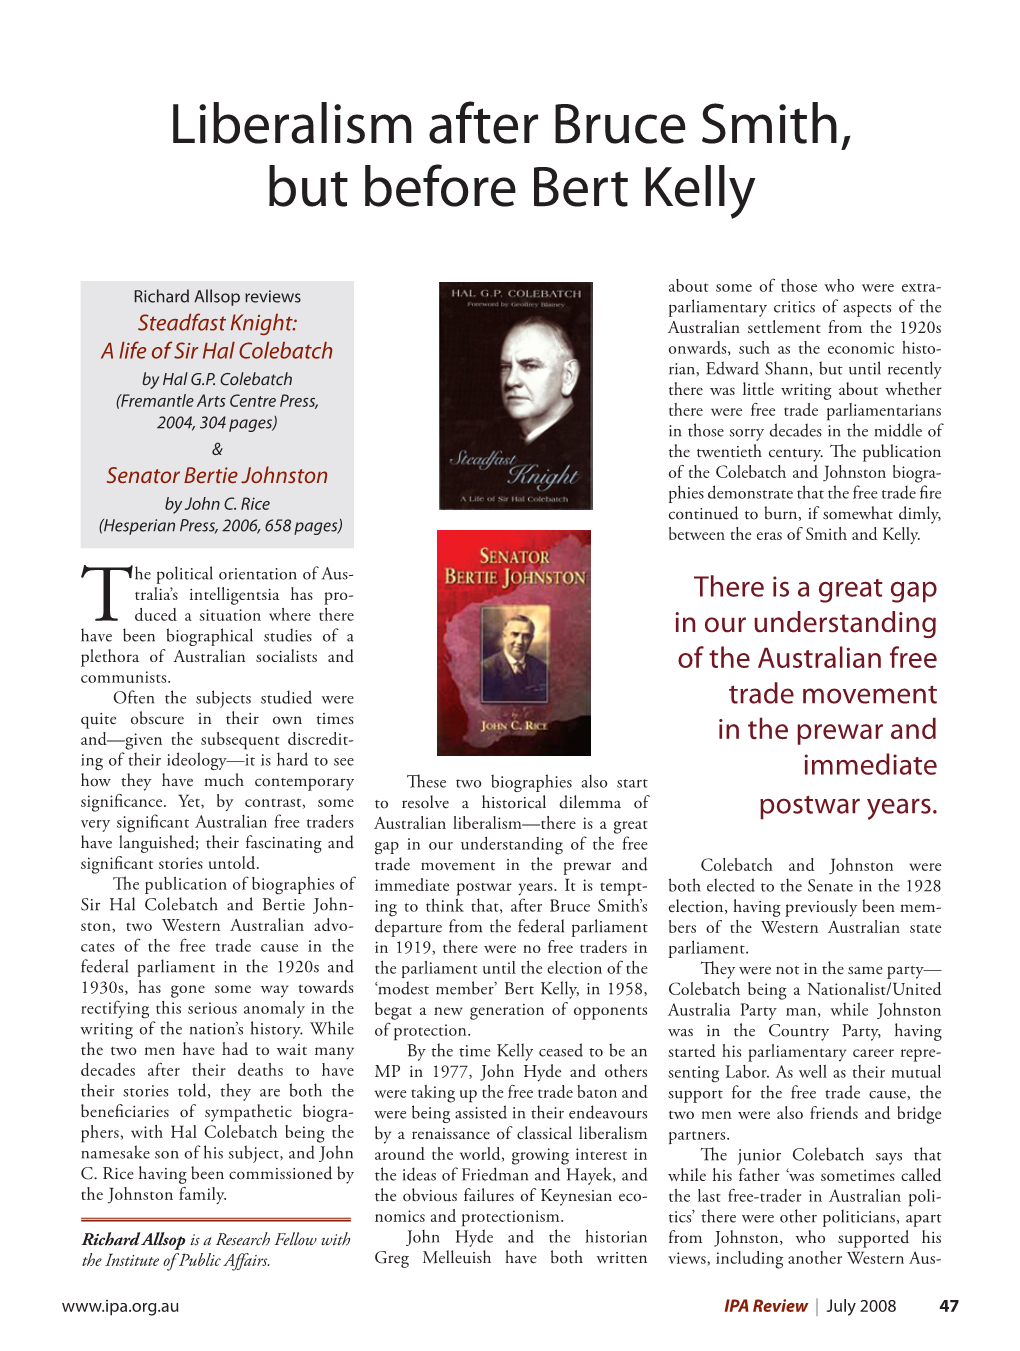 Liberalism After Bruce Smith, but Before Bert Kelly